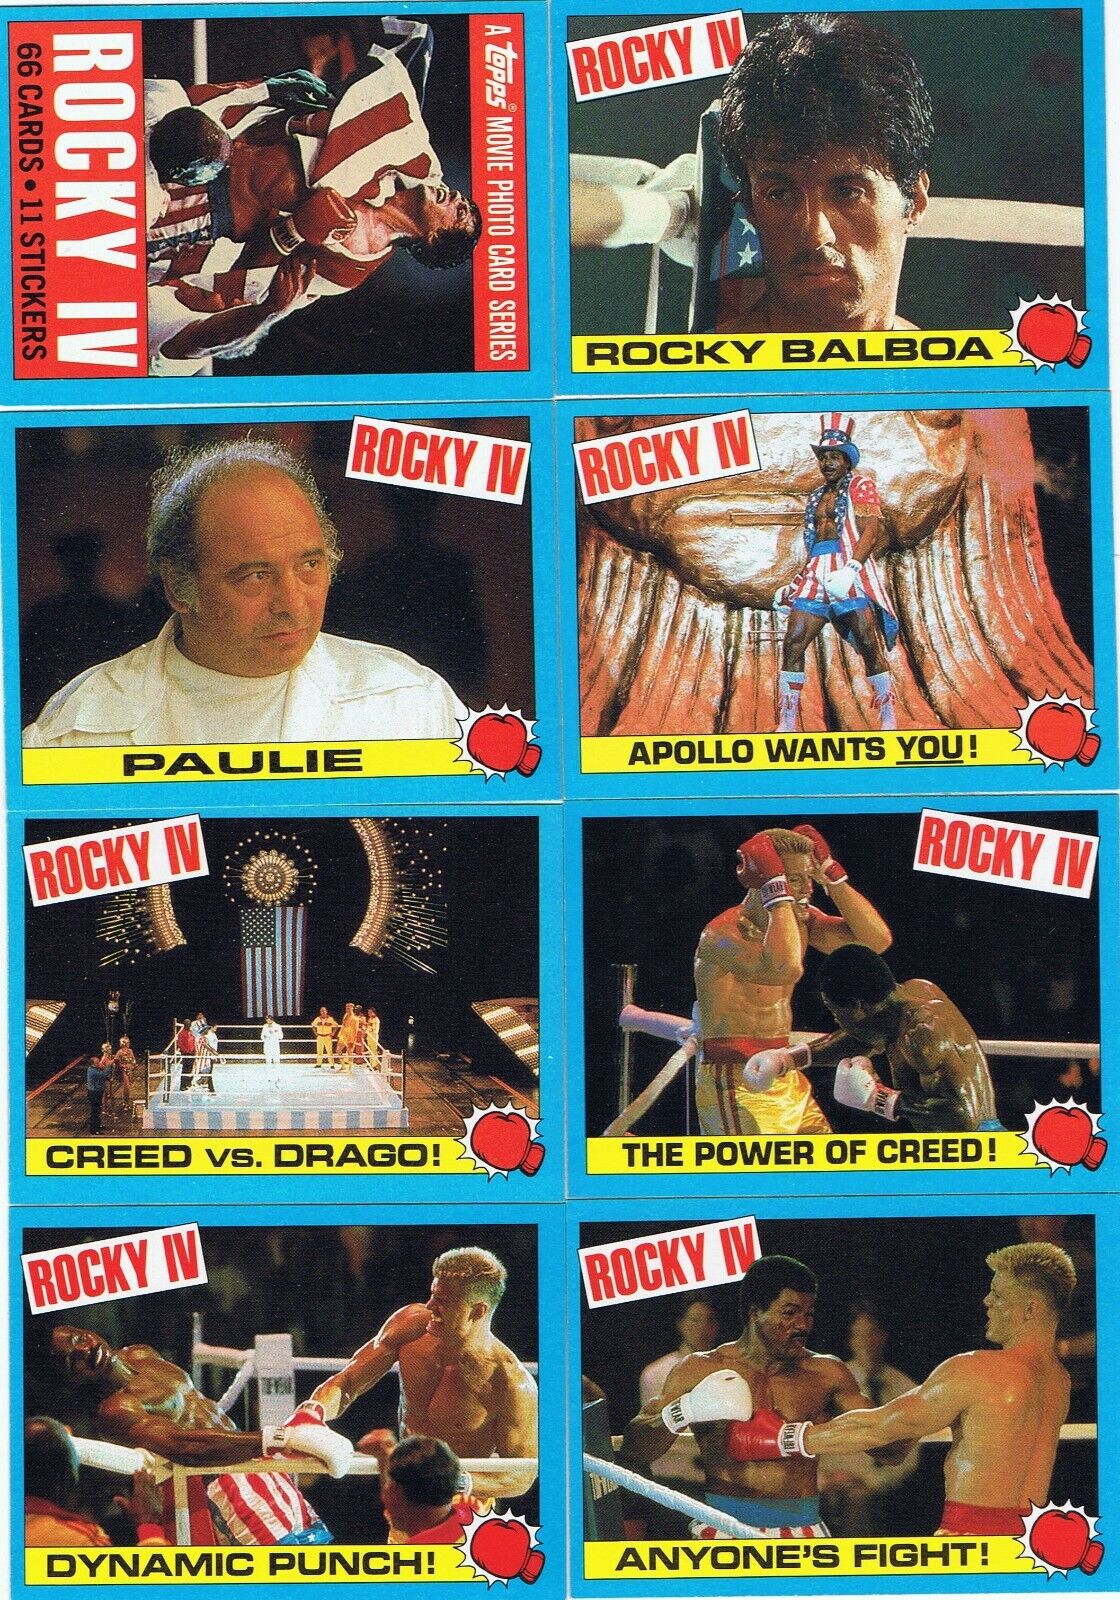 Rocky IV by Topps in 1985 SINGLE CARDS $1 each + Discounts + Free wax cards.